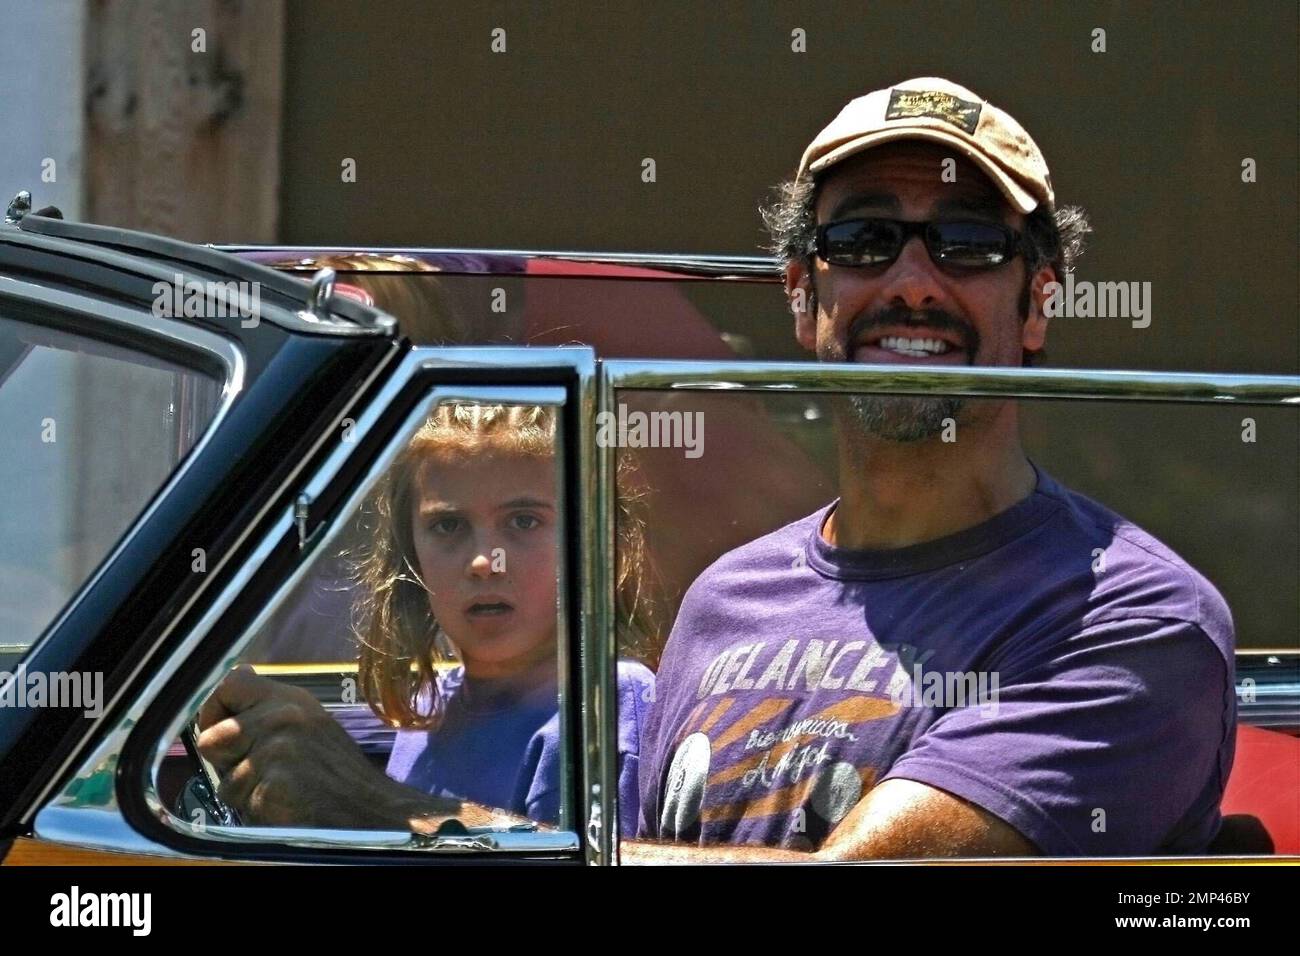 Exclusive!! Brad Garrett looks like a cartoon character behind the wheel of his antique Chrysler Town and Country while out for a drive with the kids in Malibu, CA. 6/29/08. Stock Photo